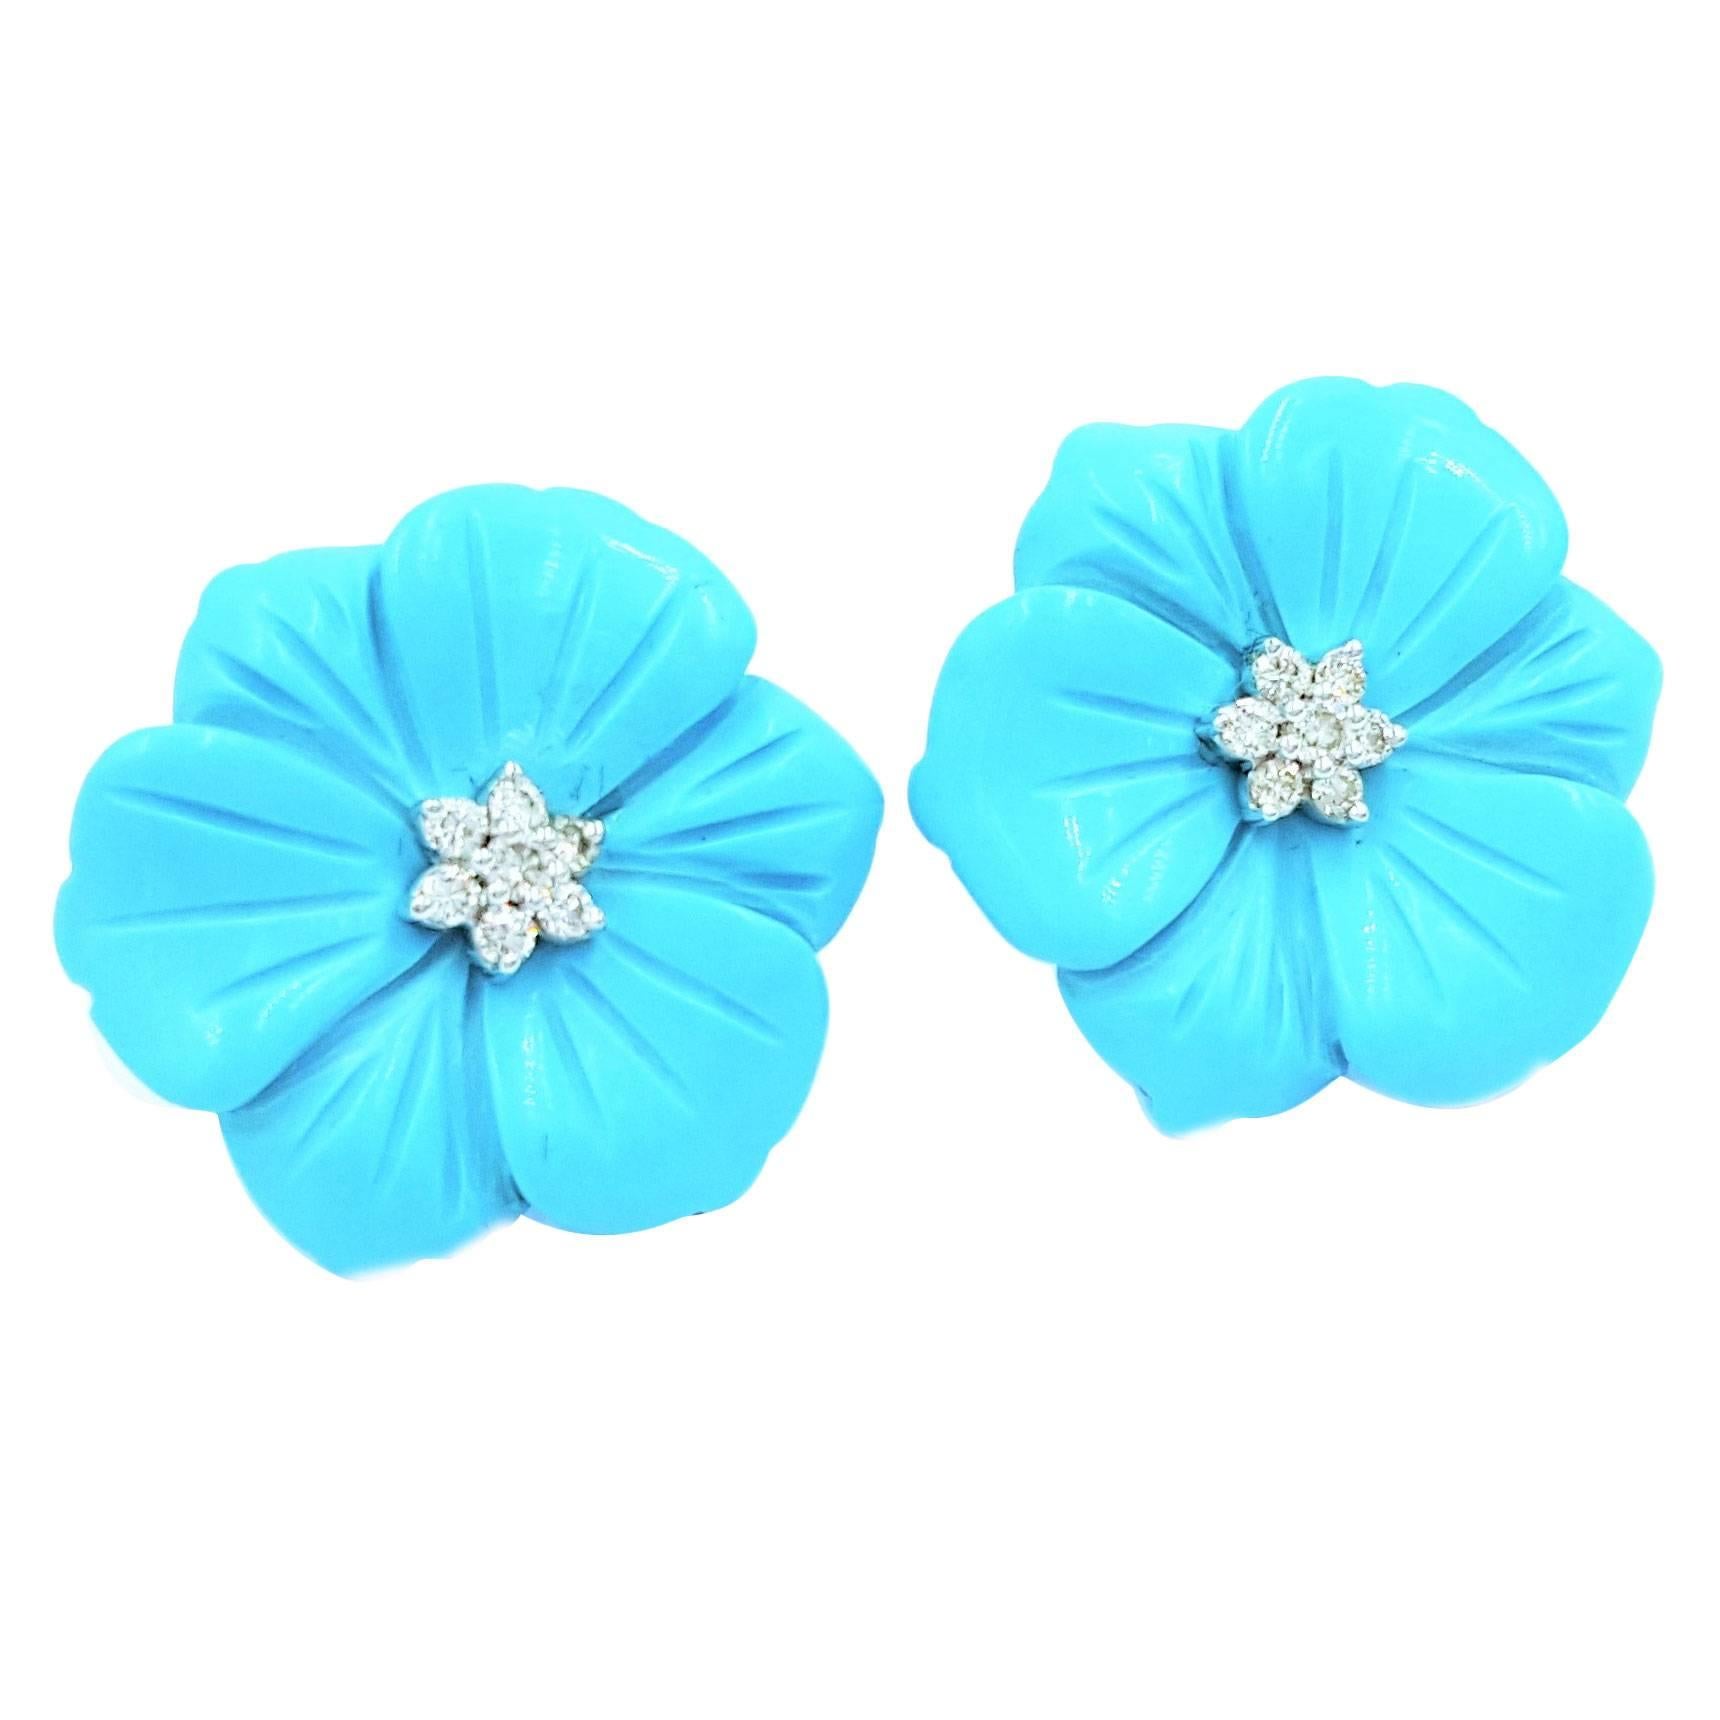 Adorable Hand Carved Persian Turquoise & Diamond Gold Flower Motif Stud Earrings